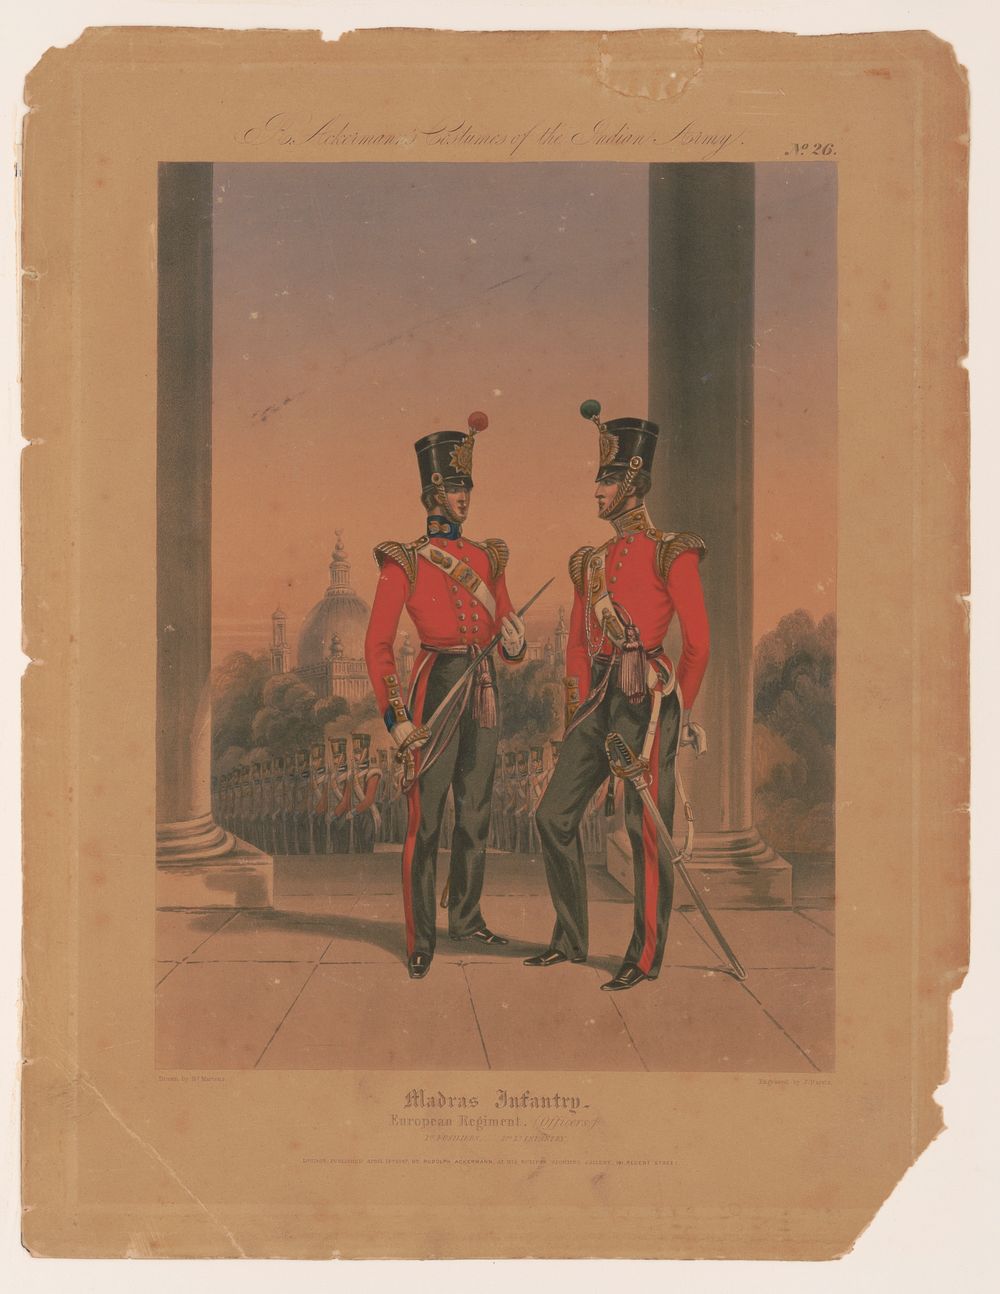 R. Ackermann's costumes of the Indian Army. No. 26. Madras Infantry--European Regiment (Officers) 1st Fusiliers, 2nd Lt.…